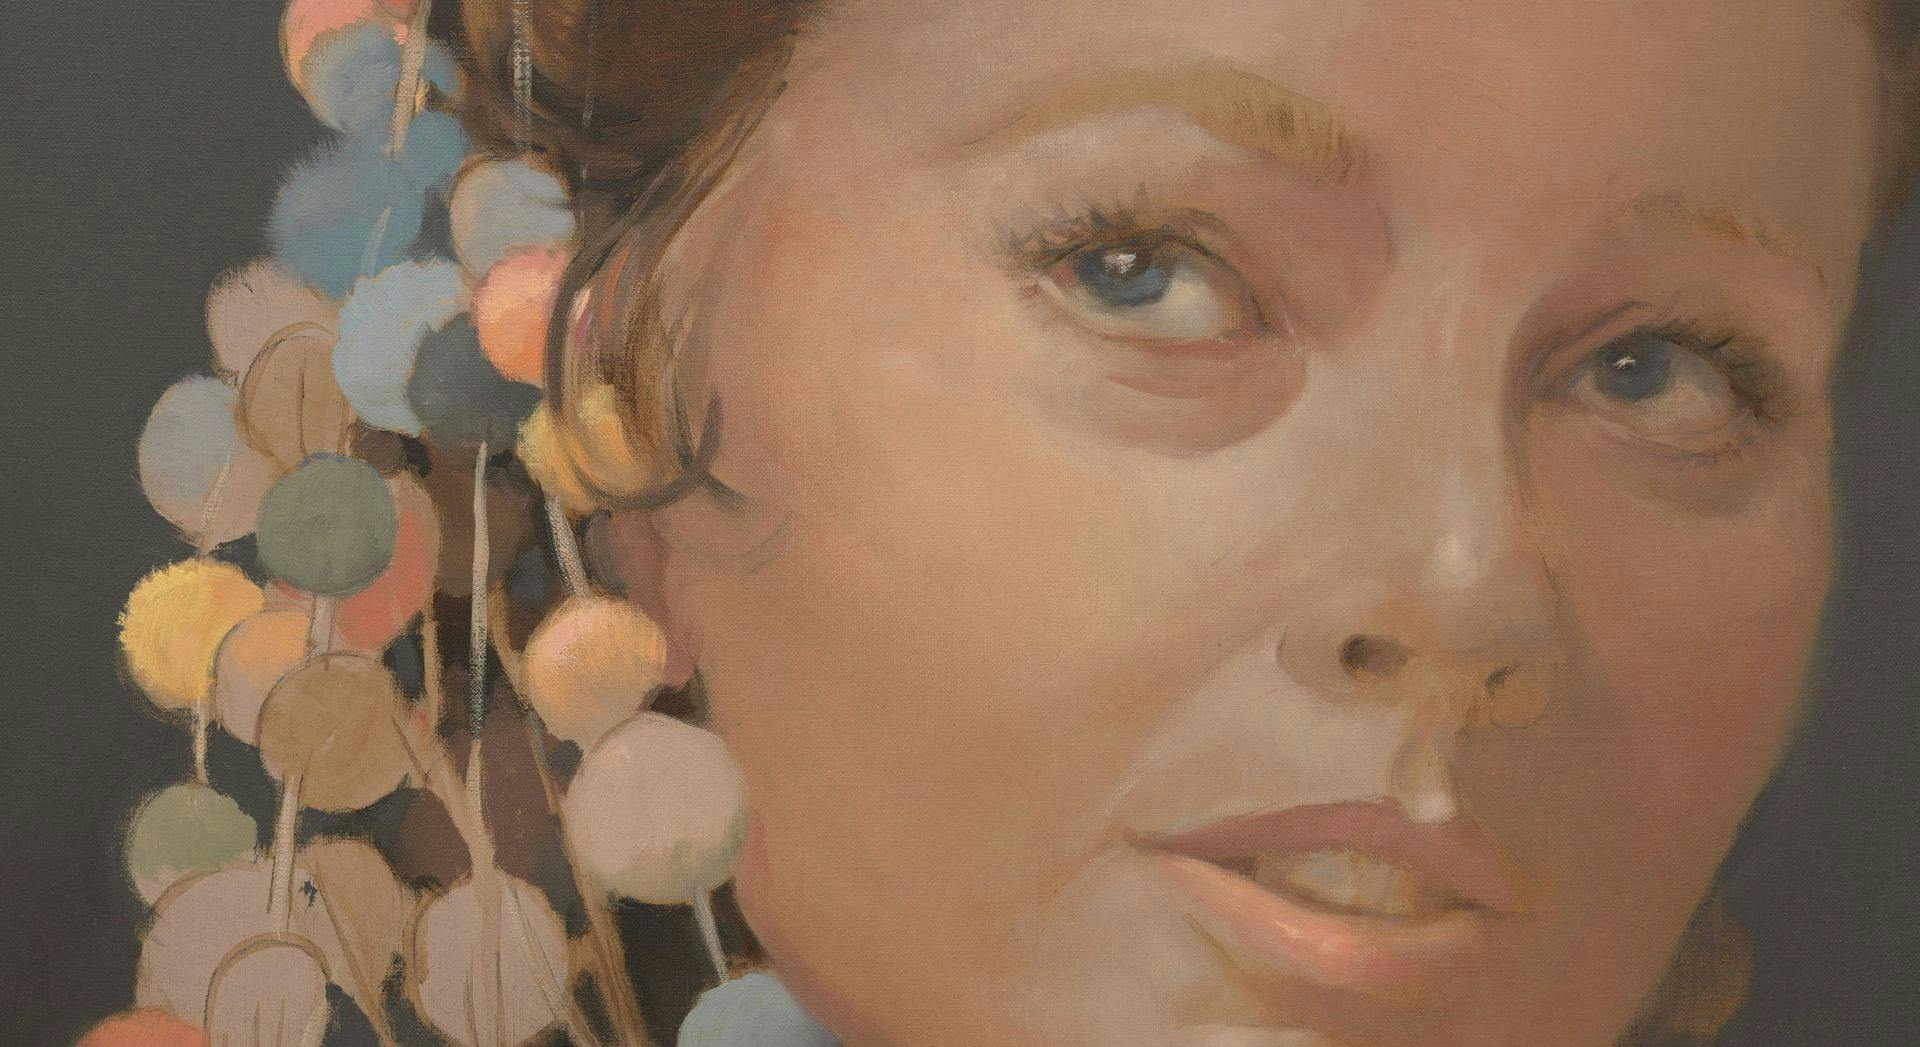 A detail from a painting by Lisa Yuskavage, titled The Psychic, dated 2020.